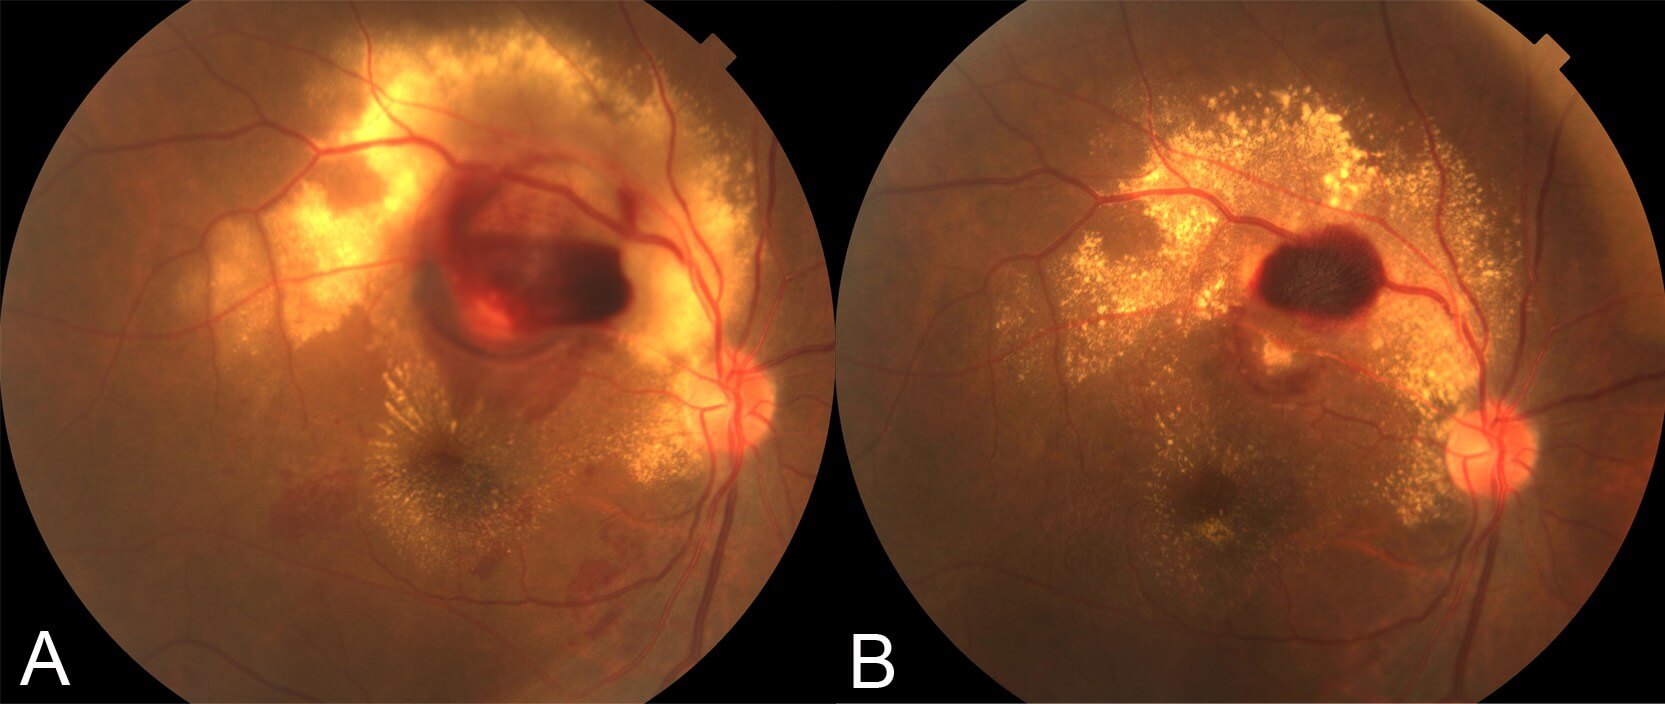 A) At one month following laser the subretinal fluid had cleared from the macula. There is significant lipid deposition evident. B) At four months following laser the lipid and haemorrhage is resorbing. The thrombosed macroaneurysm is seen inferior to the residual superficial retinal haemorrhage. Visual acuity is 6/24 at this stage.